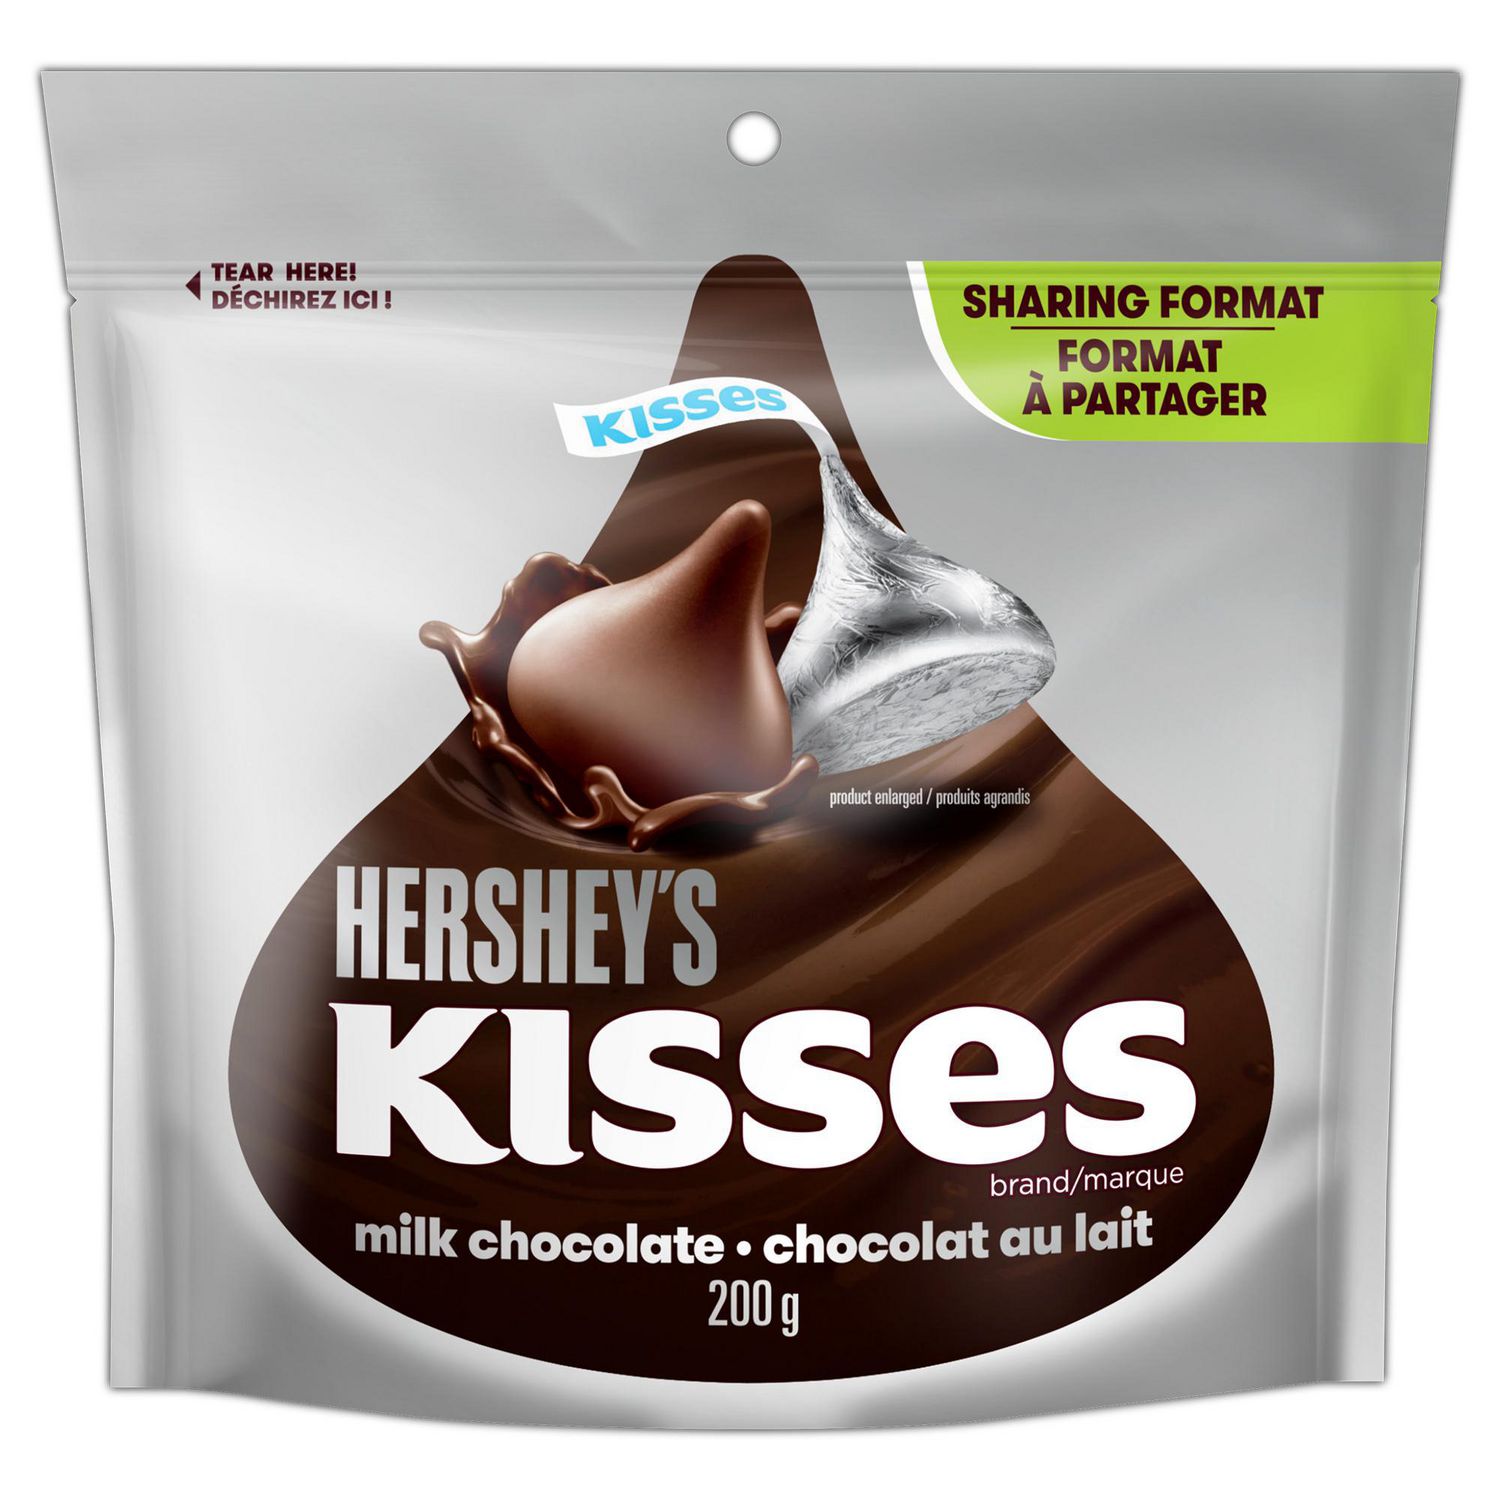 Hershey Dating Policy